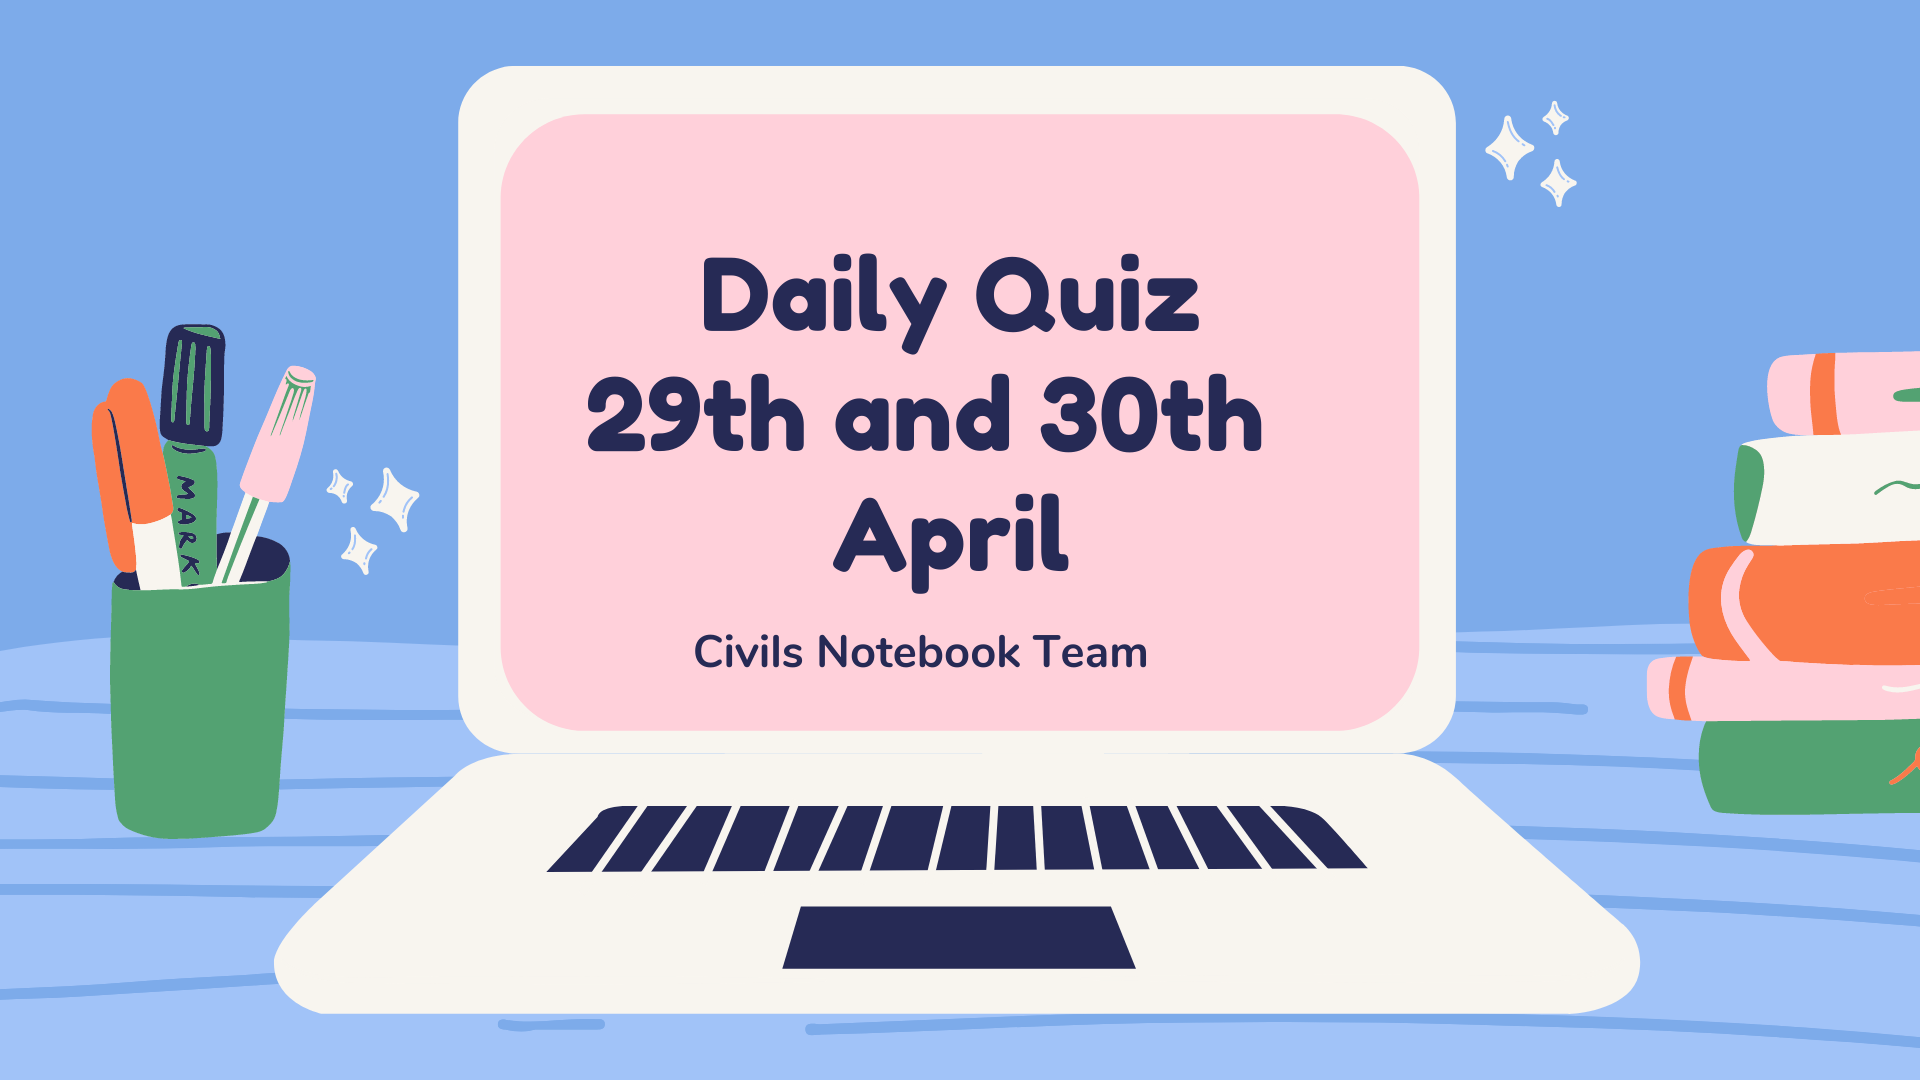 Read more about the article Daily Quiz: 29th and 30th April